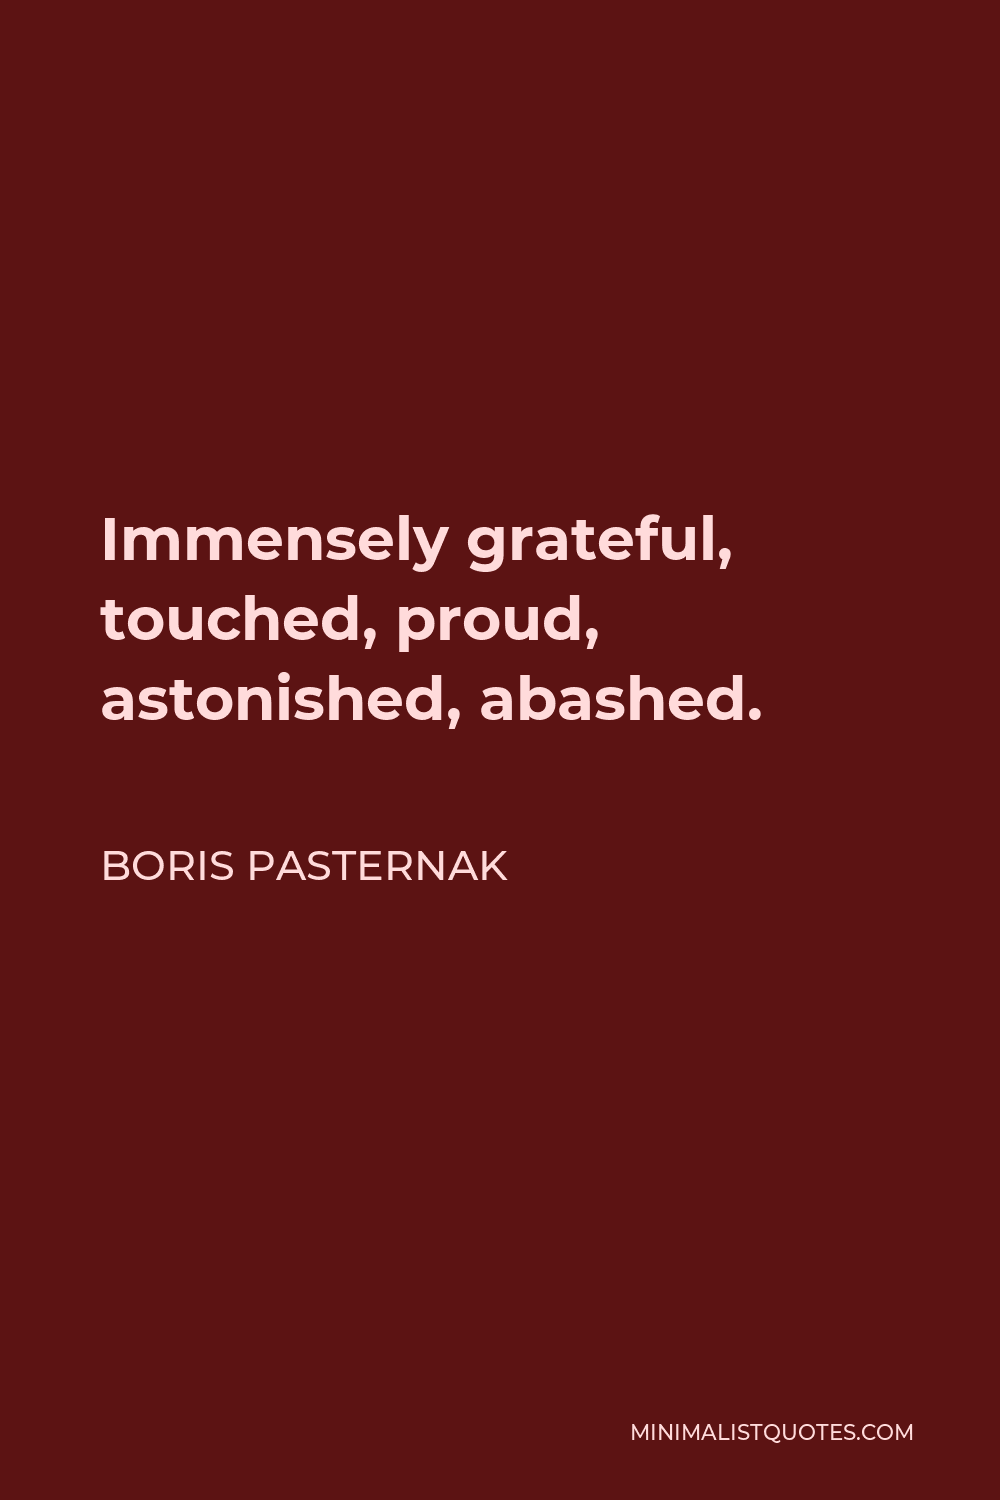 Boris Pasternak Quote - Immensely grateful, touched, proud, astonished, abashed.